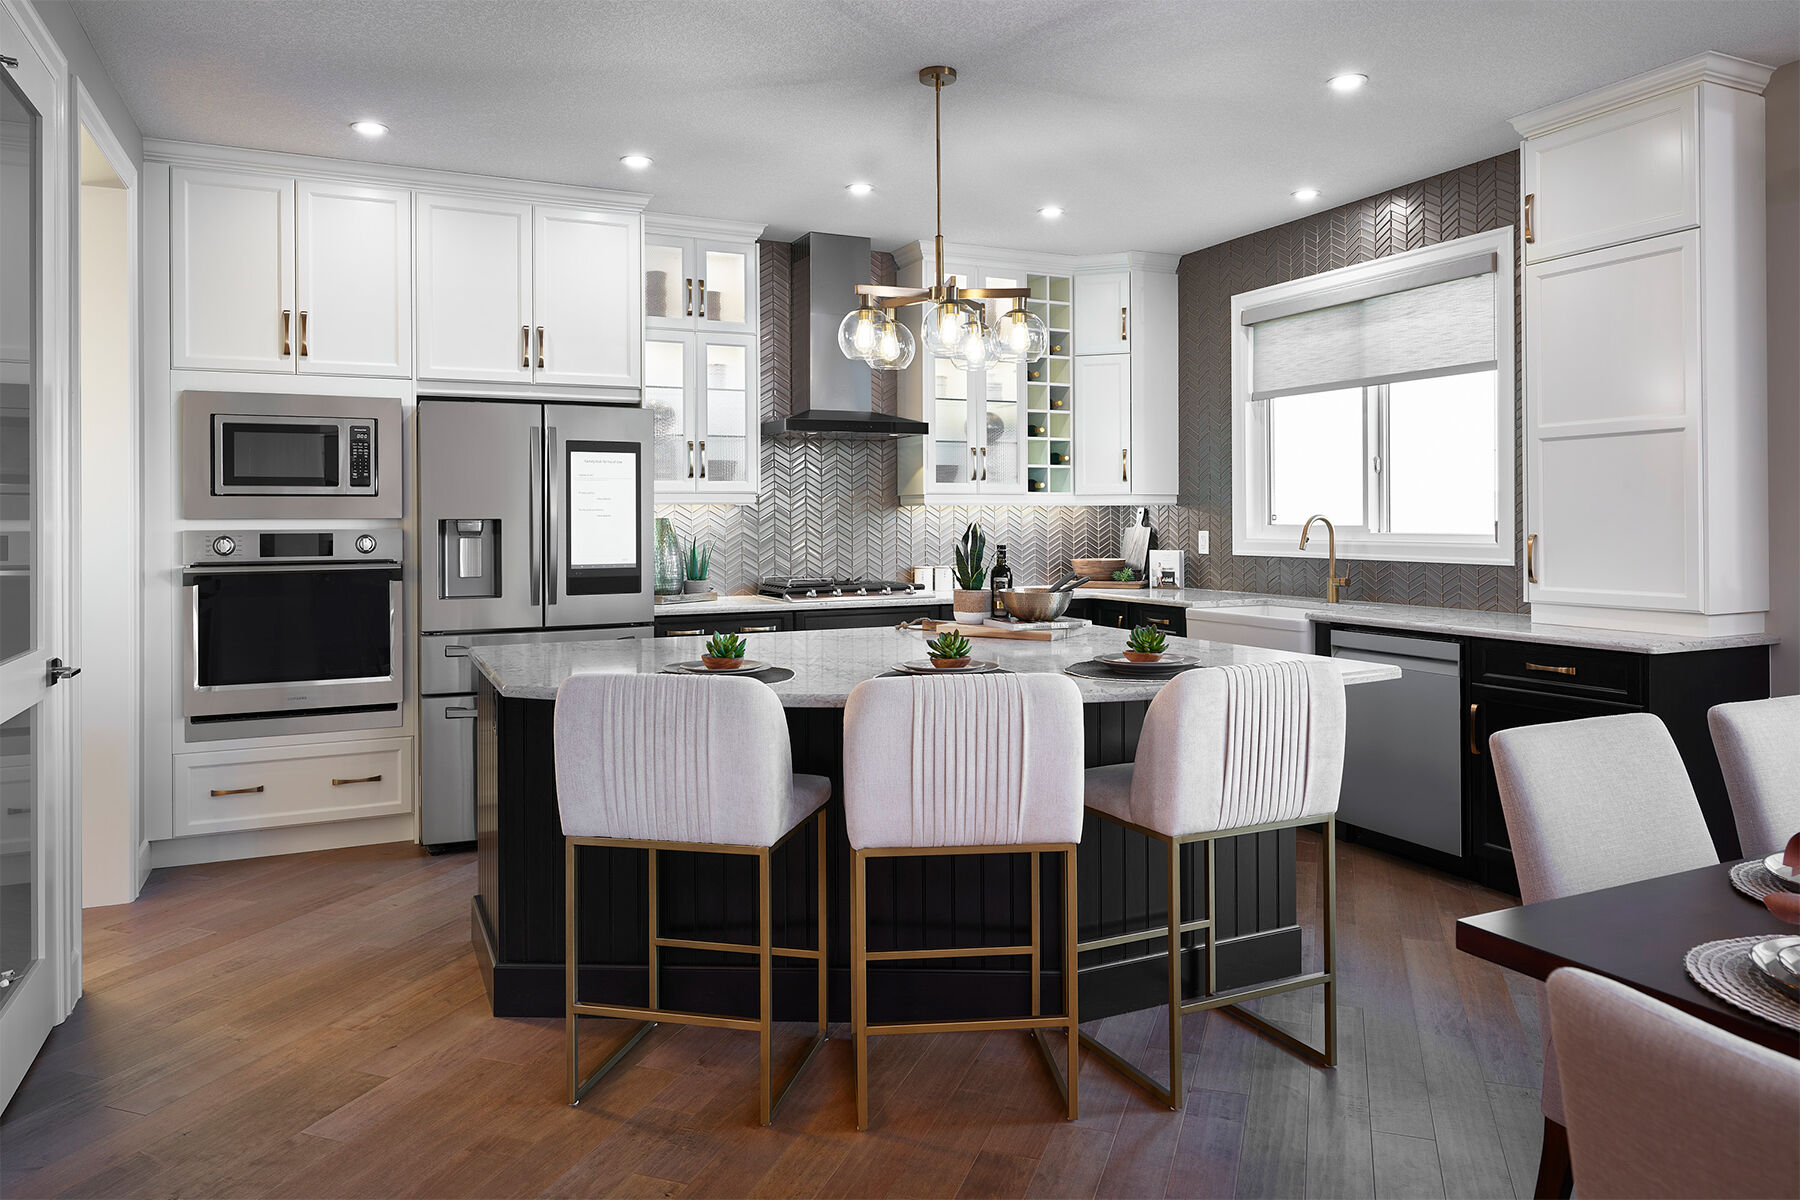 Kitchen with white cabinets and dark hardwood floors and dark central island.